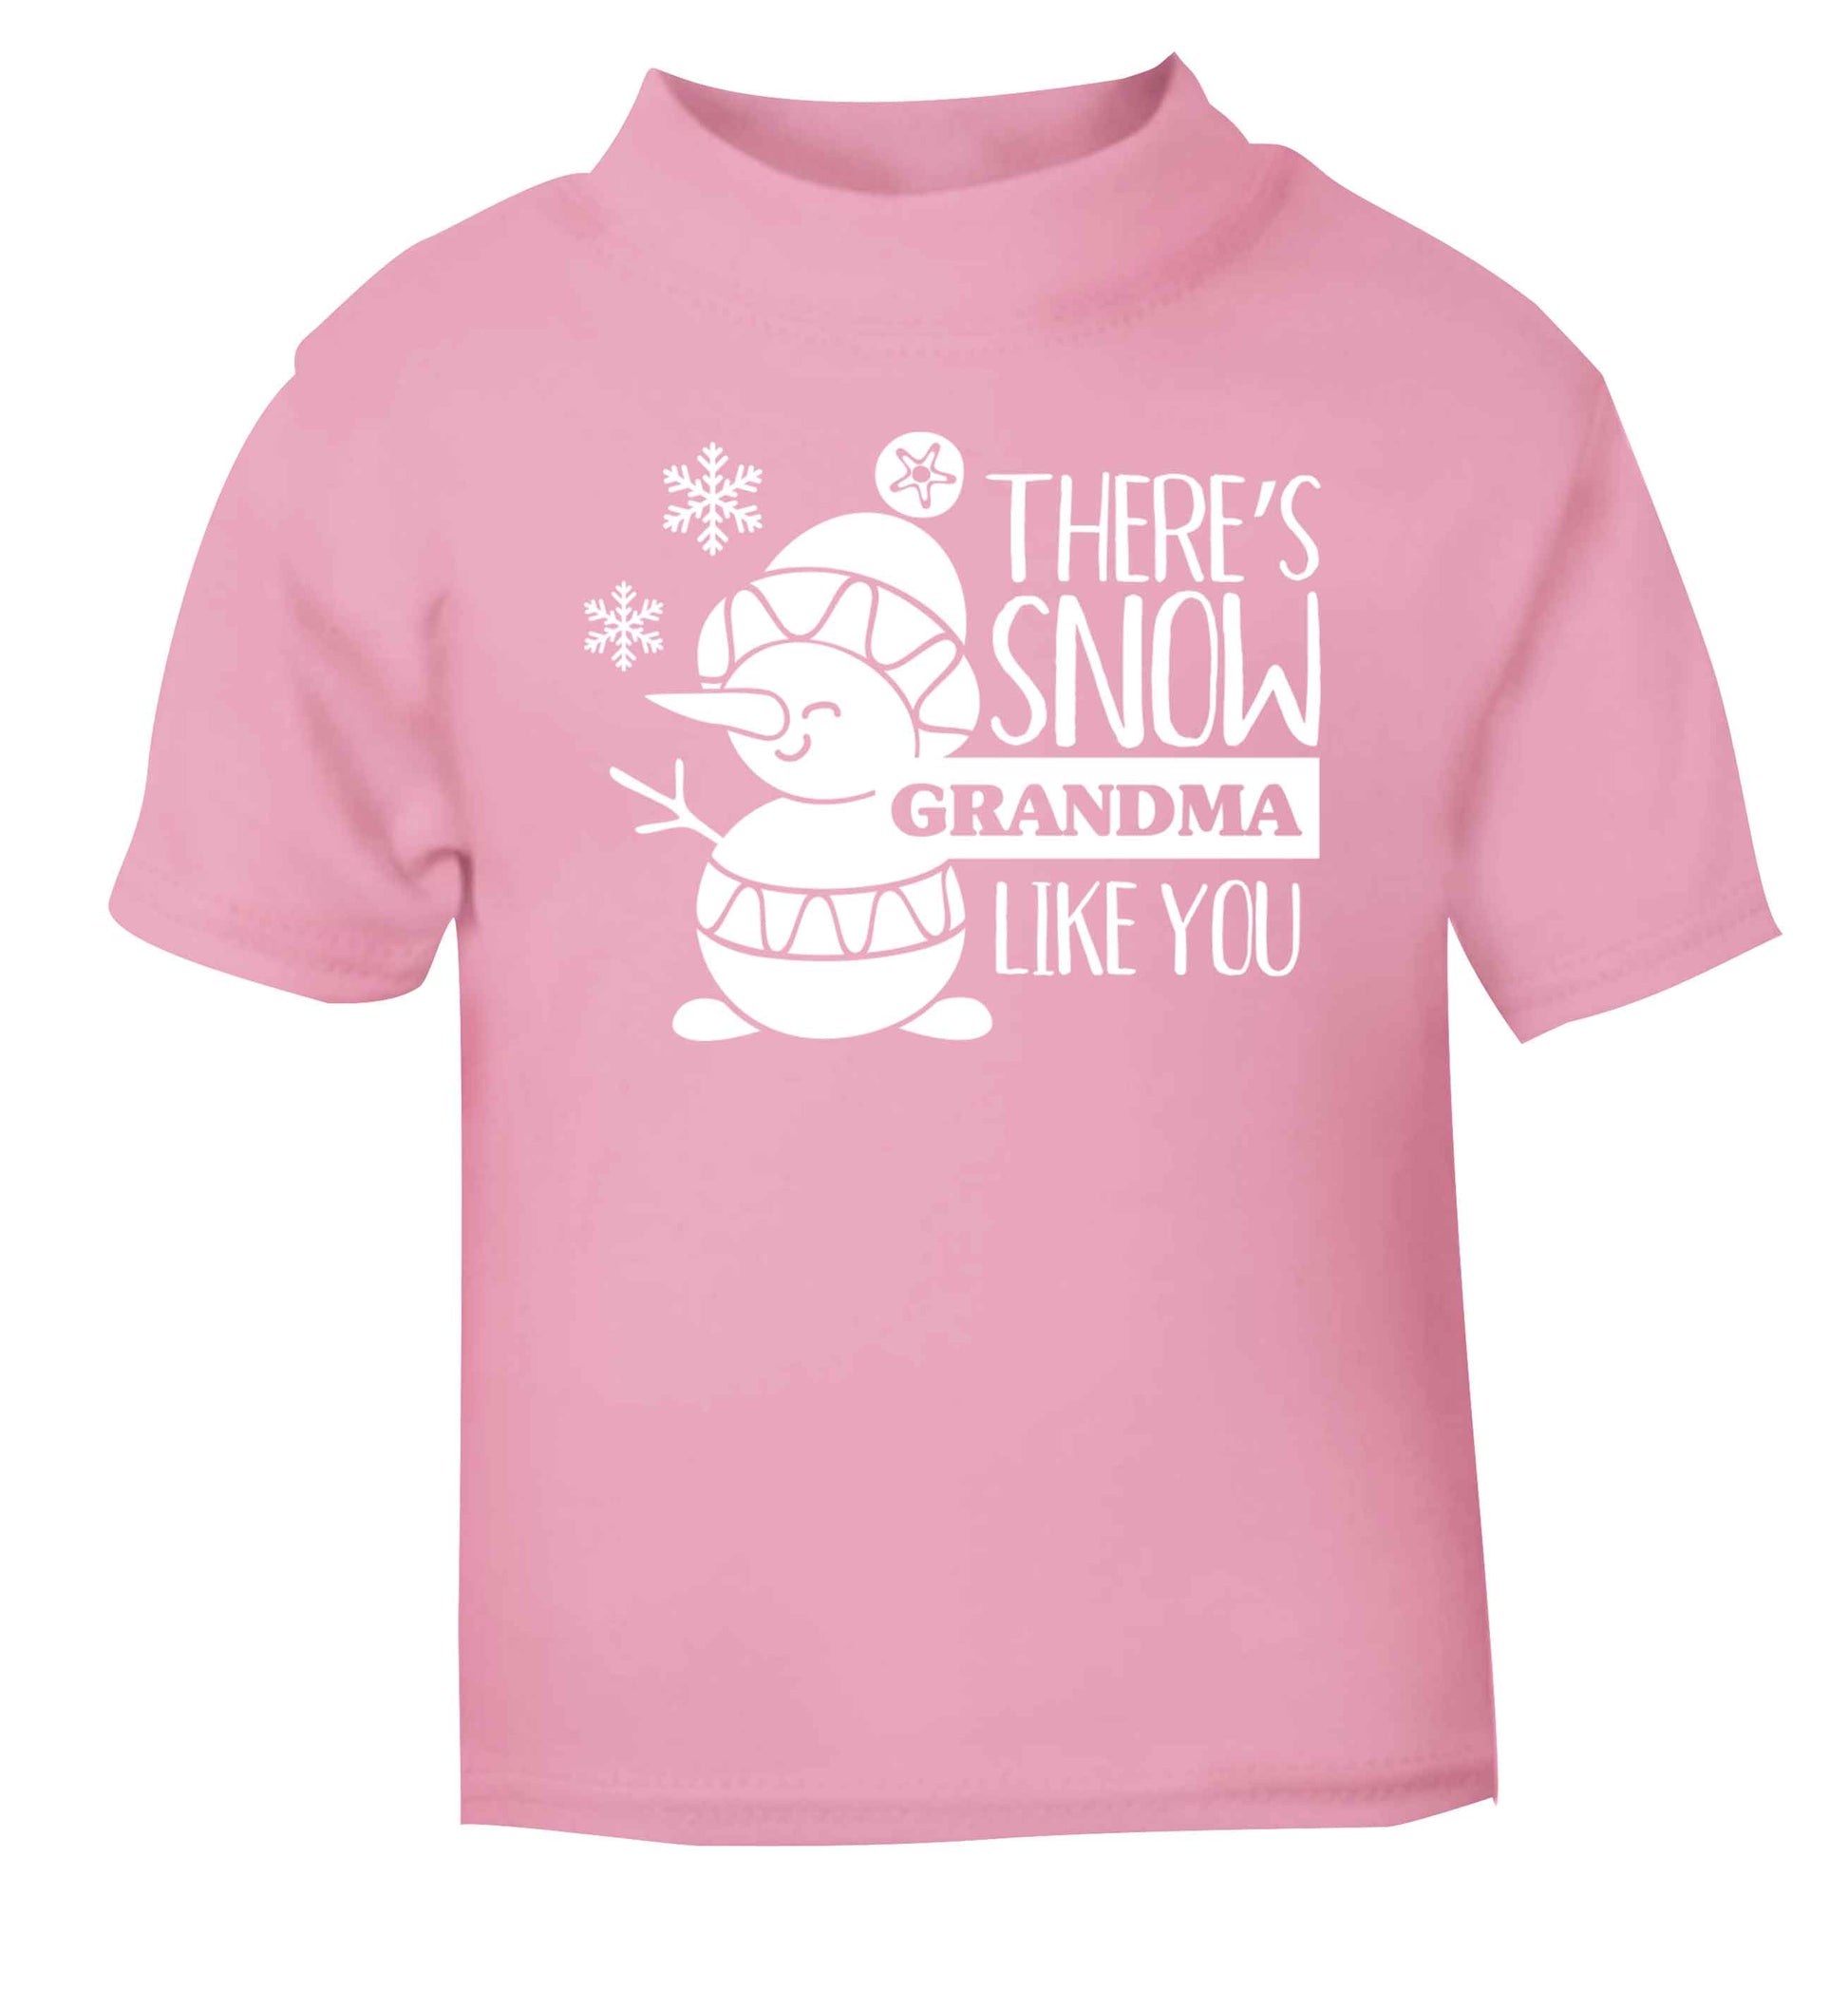 There's snow grandma like you light pink baby toddler Tshirt 2 Years